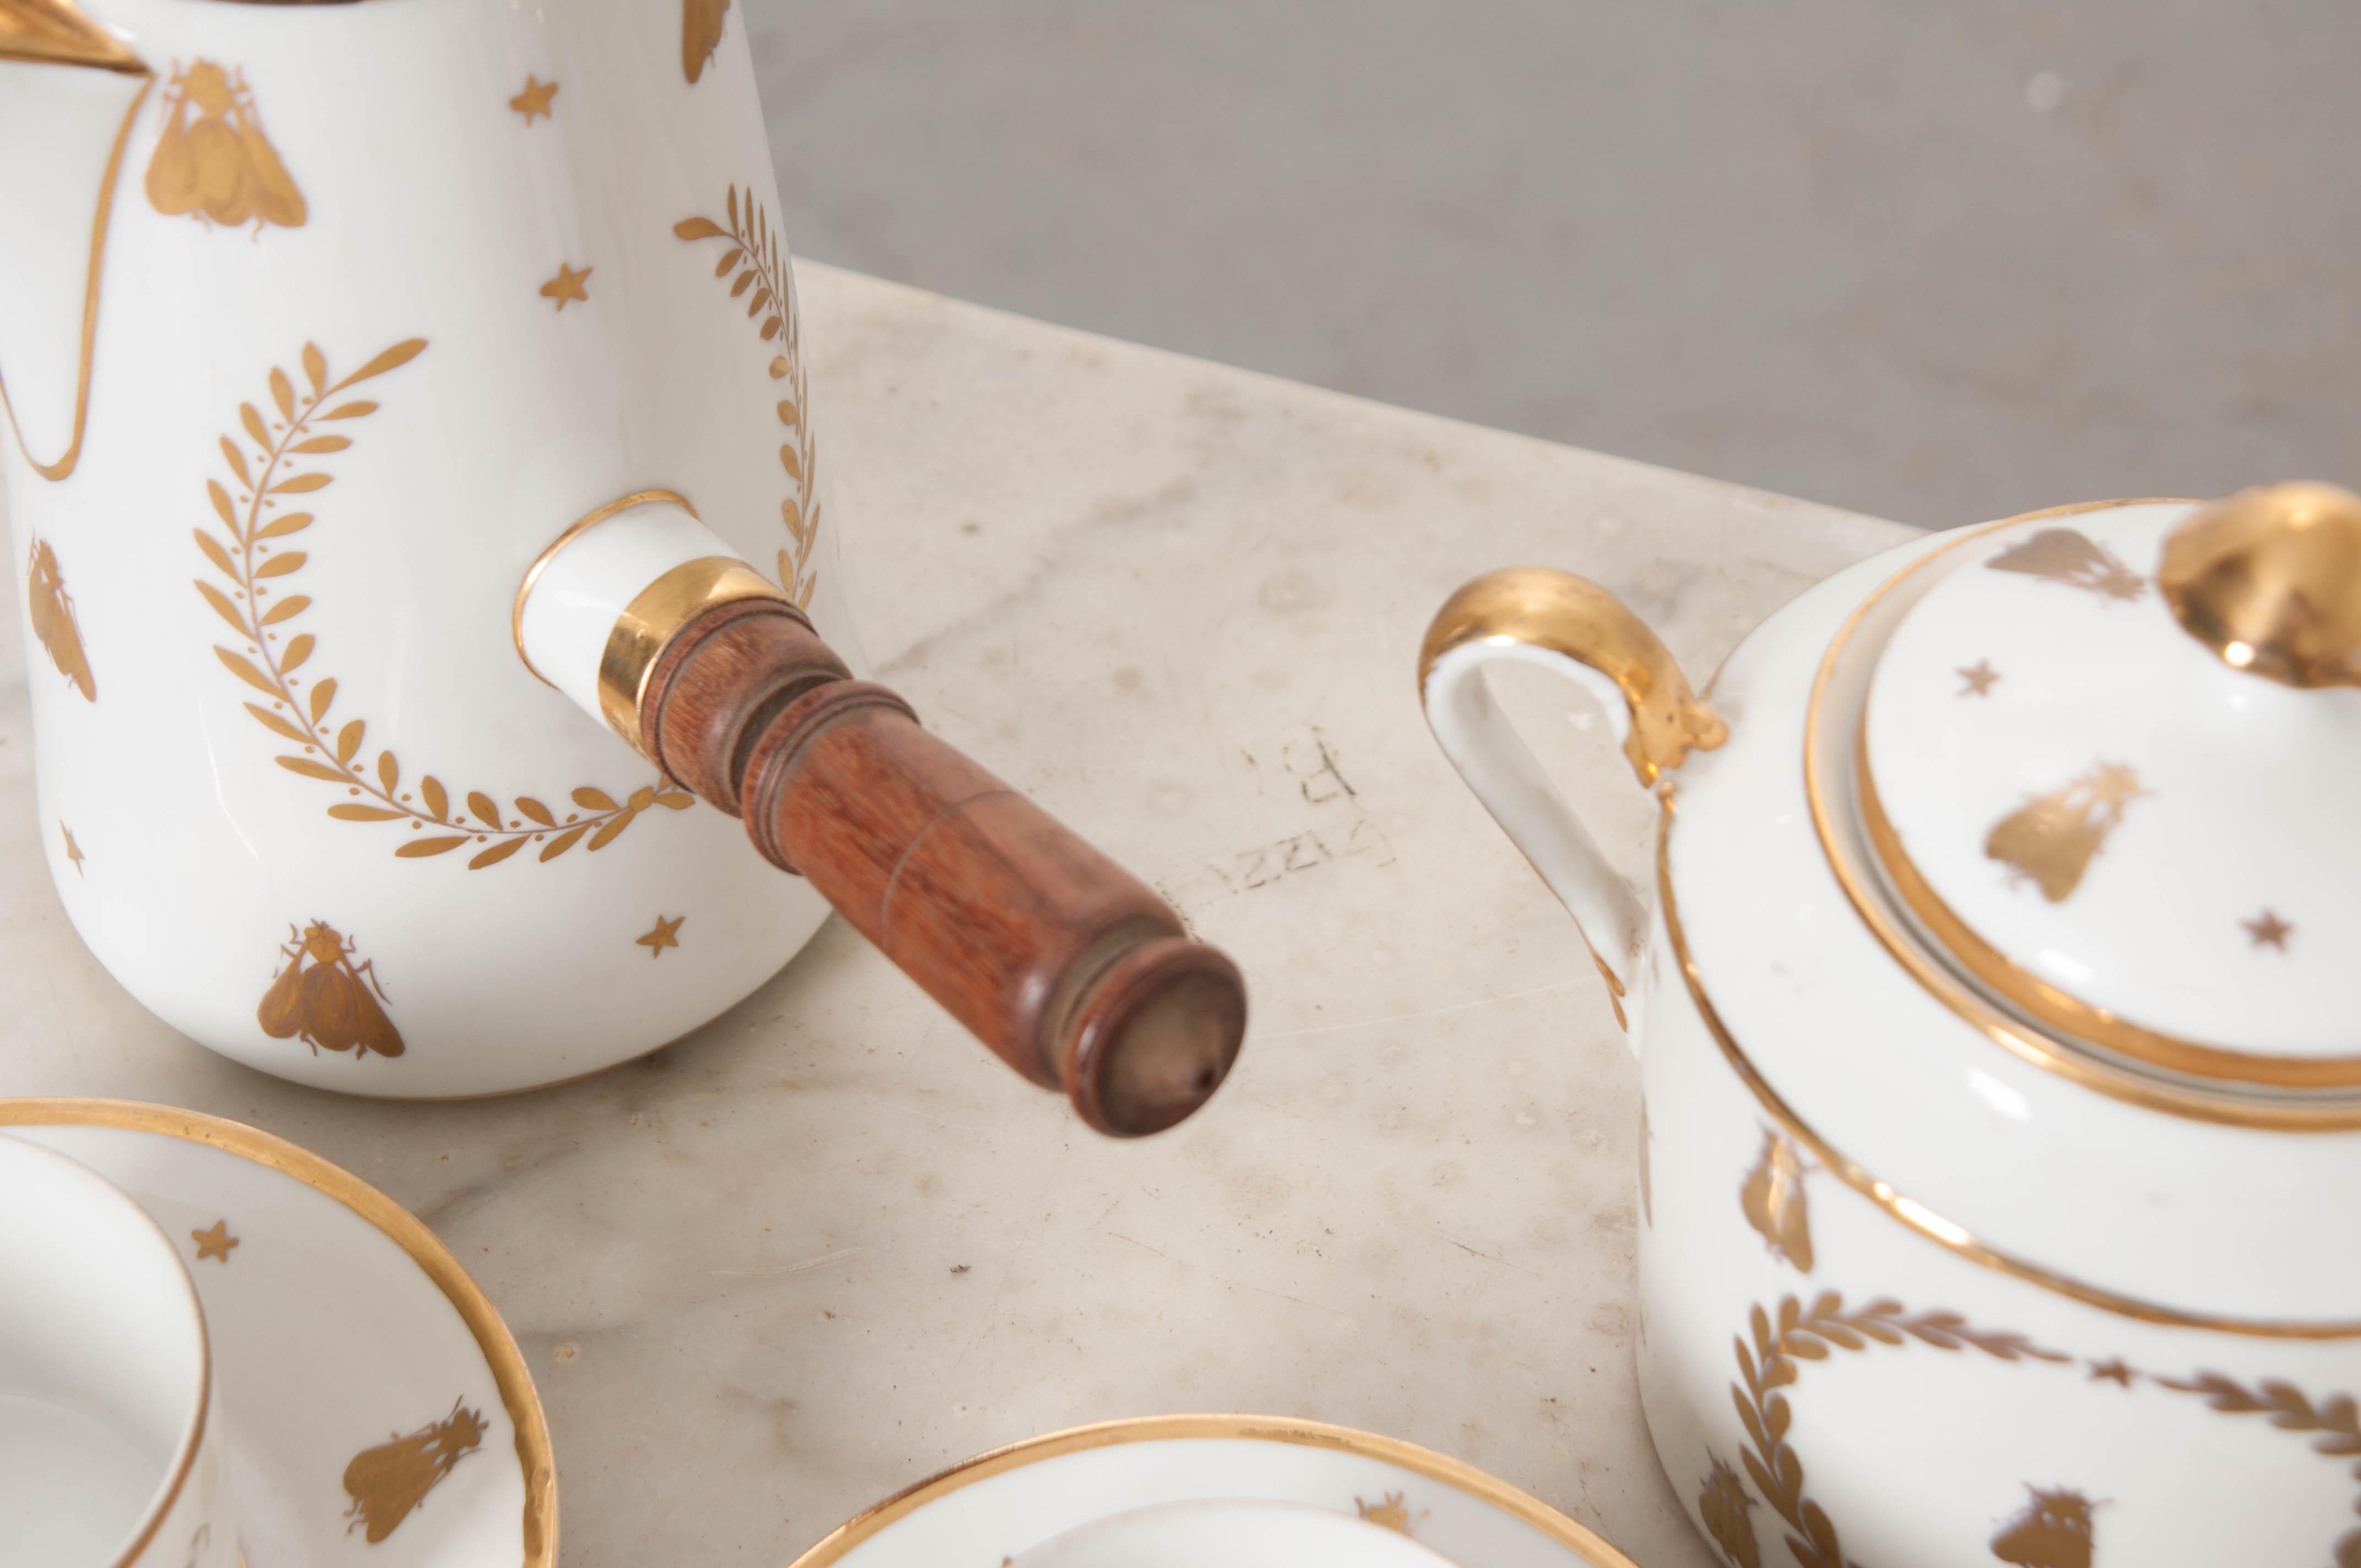 This fantastic Sèvres Porcelain hot chocolate set, circa 1755, is from France and features the gilded Napoleonic “Bee-and-Star” diapered motif centered by a laurel wreath; a stylized”Double L” underglaze blue mark centered by a “C”with “Ue Imple”